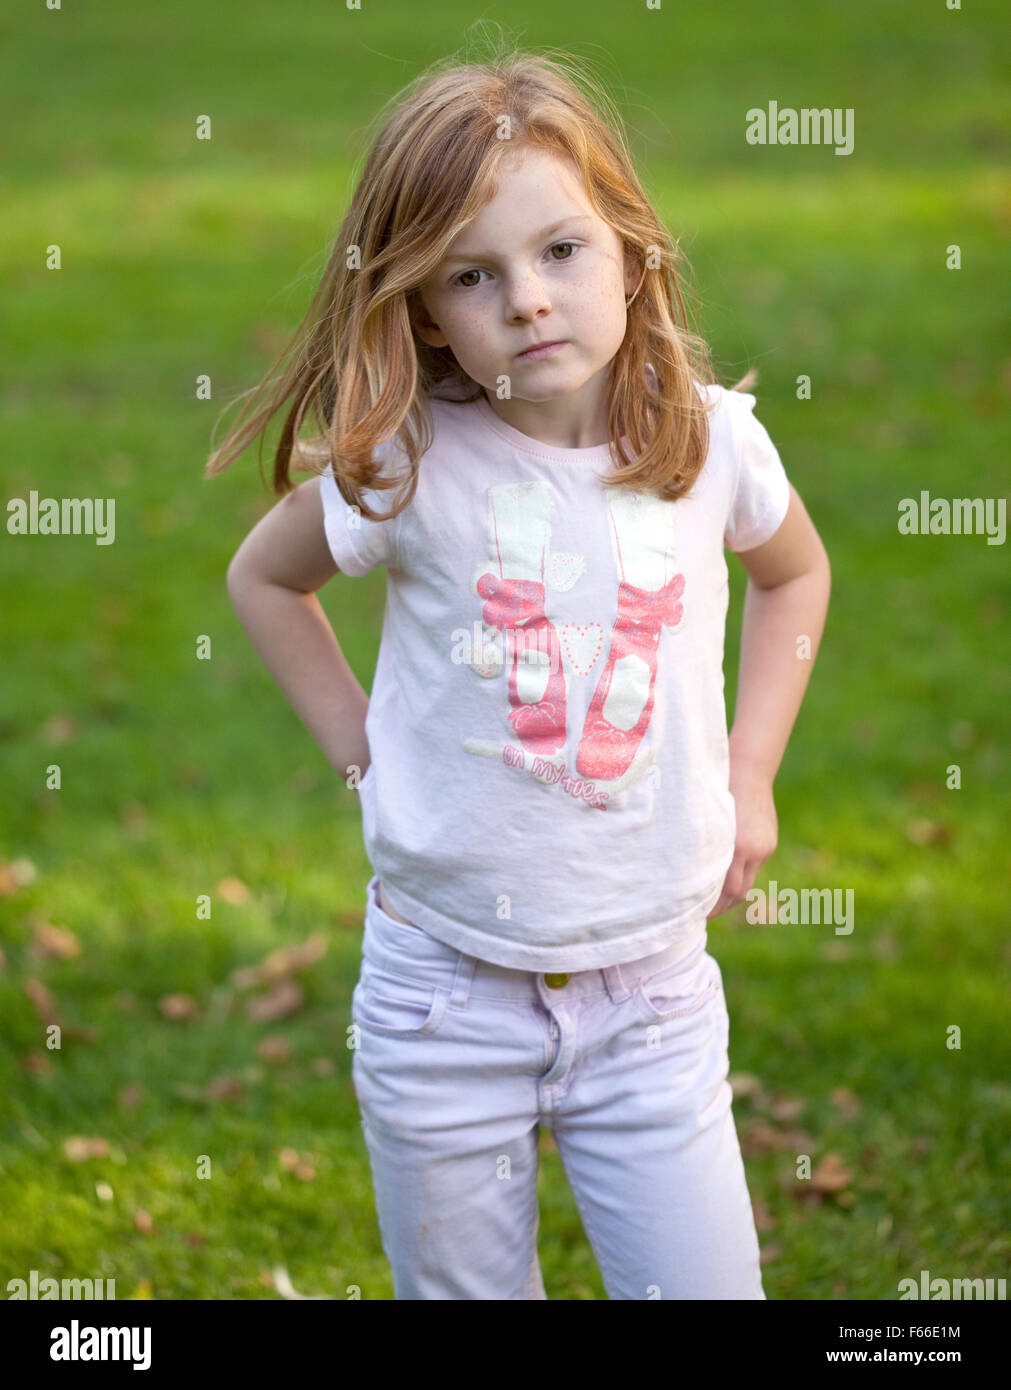 A young girl with ginger hair that contrast with the lush green grass of the park, has turned suddenly towards the camera. Stock Photo